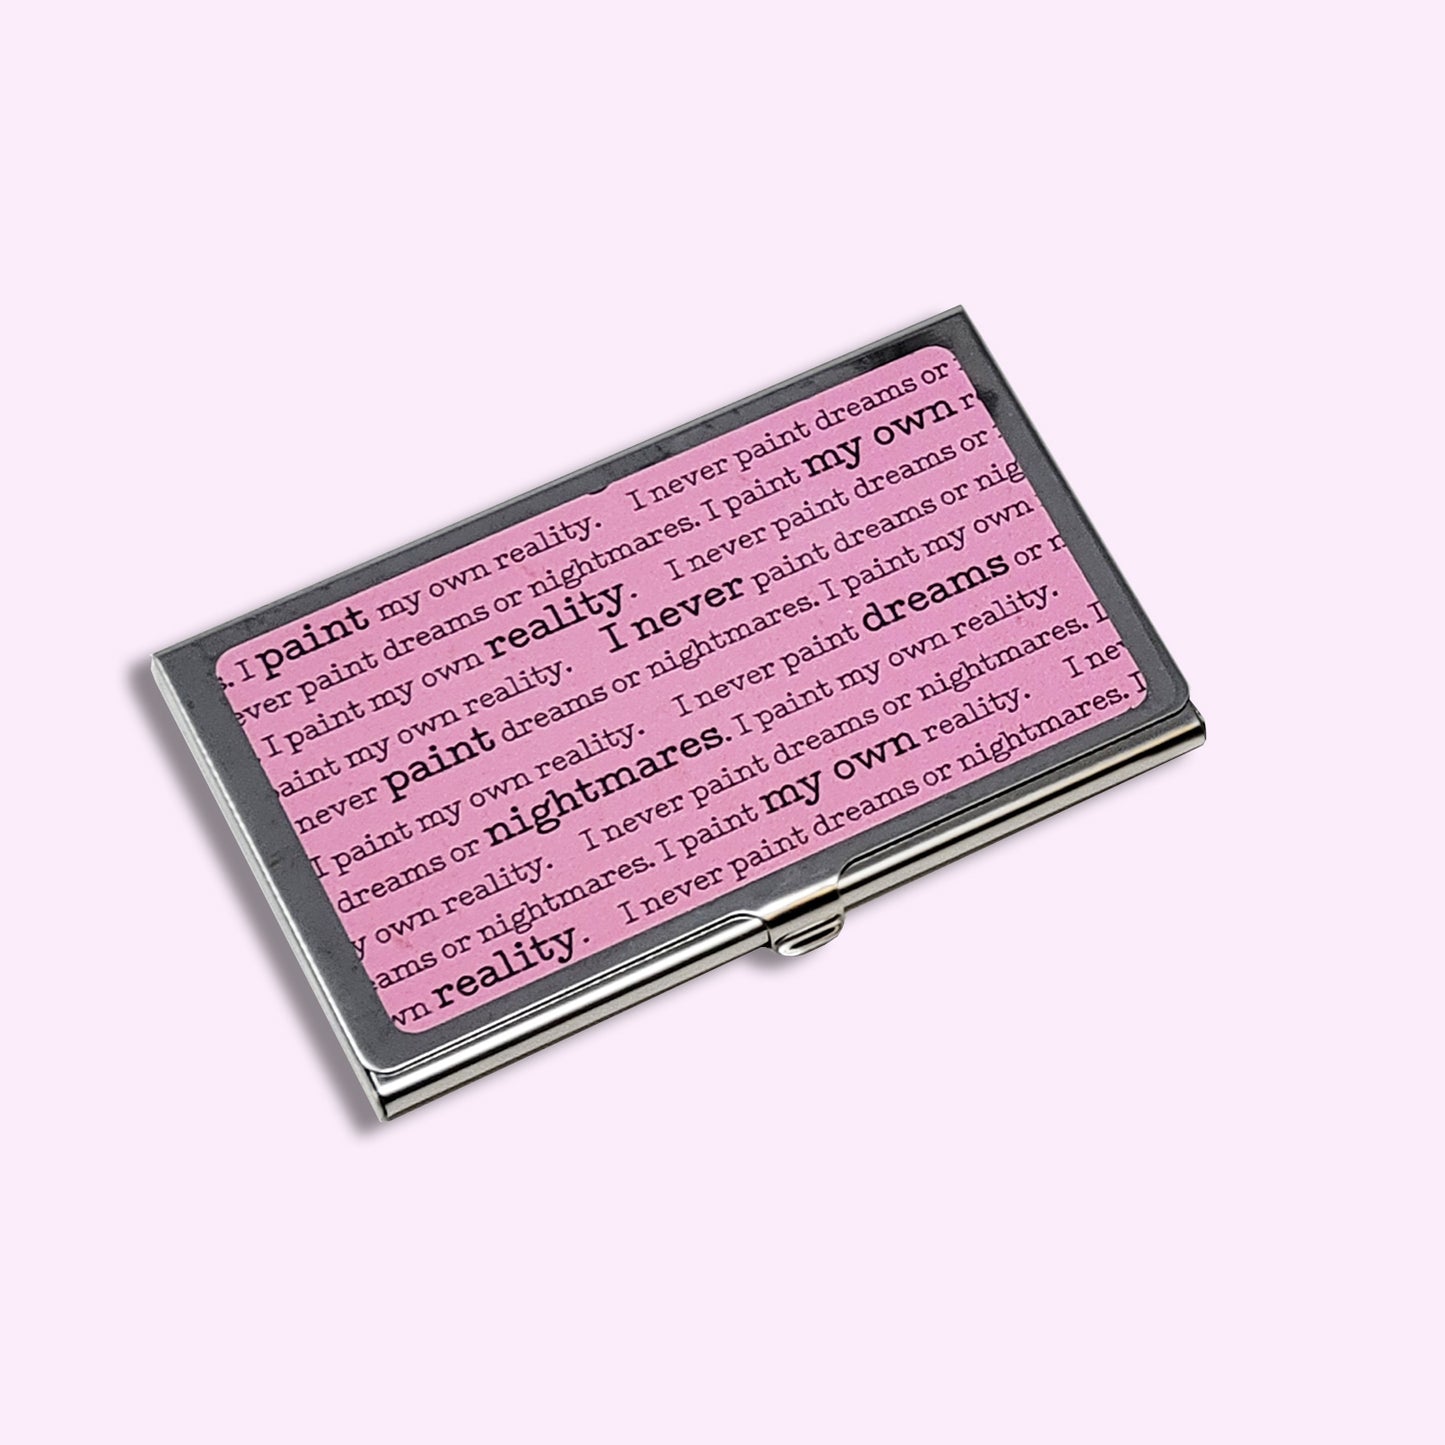 Metal Business Card Case | Frida Kahlo Quote "I never paint dreams or nightmares. I paint my own reality." illustration